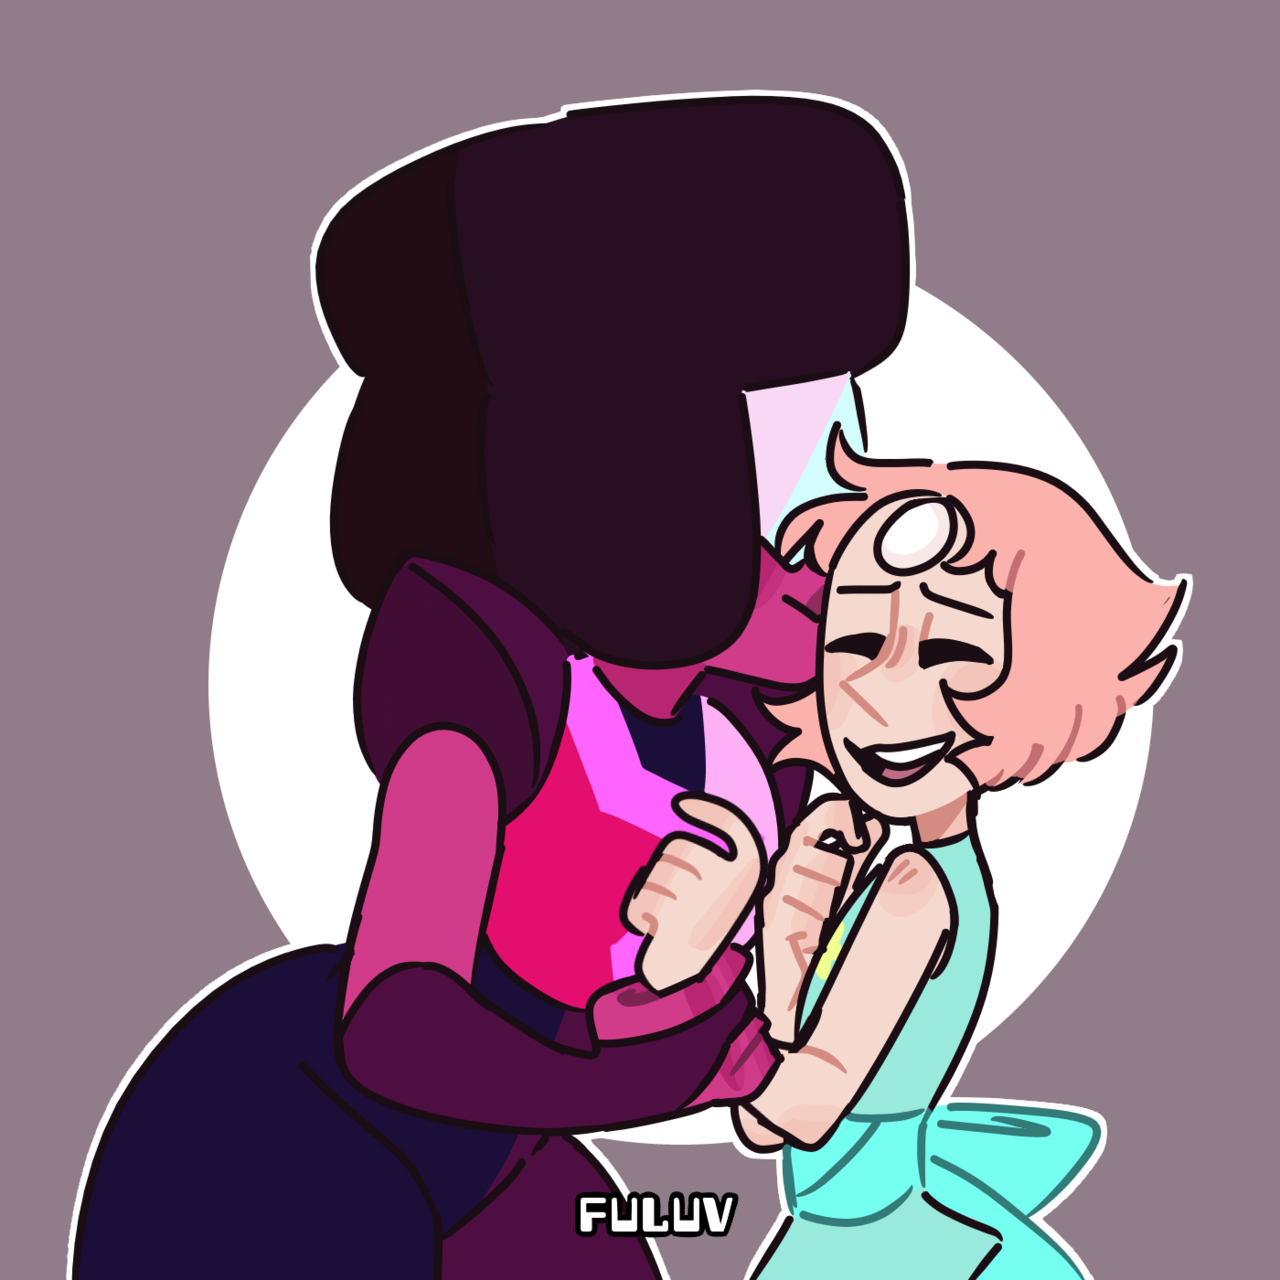 some pearlnet for y'all